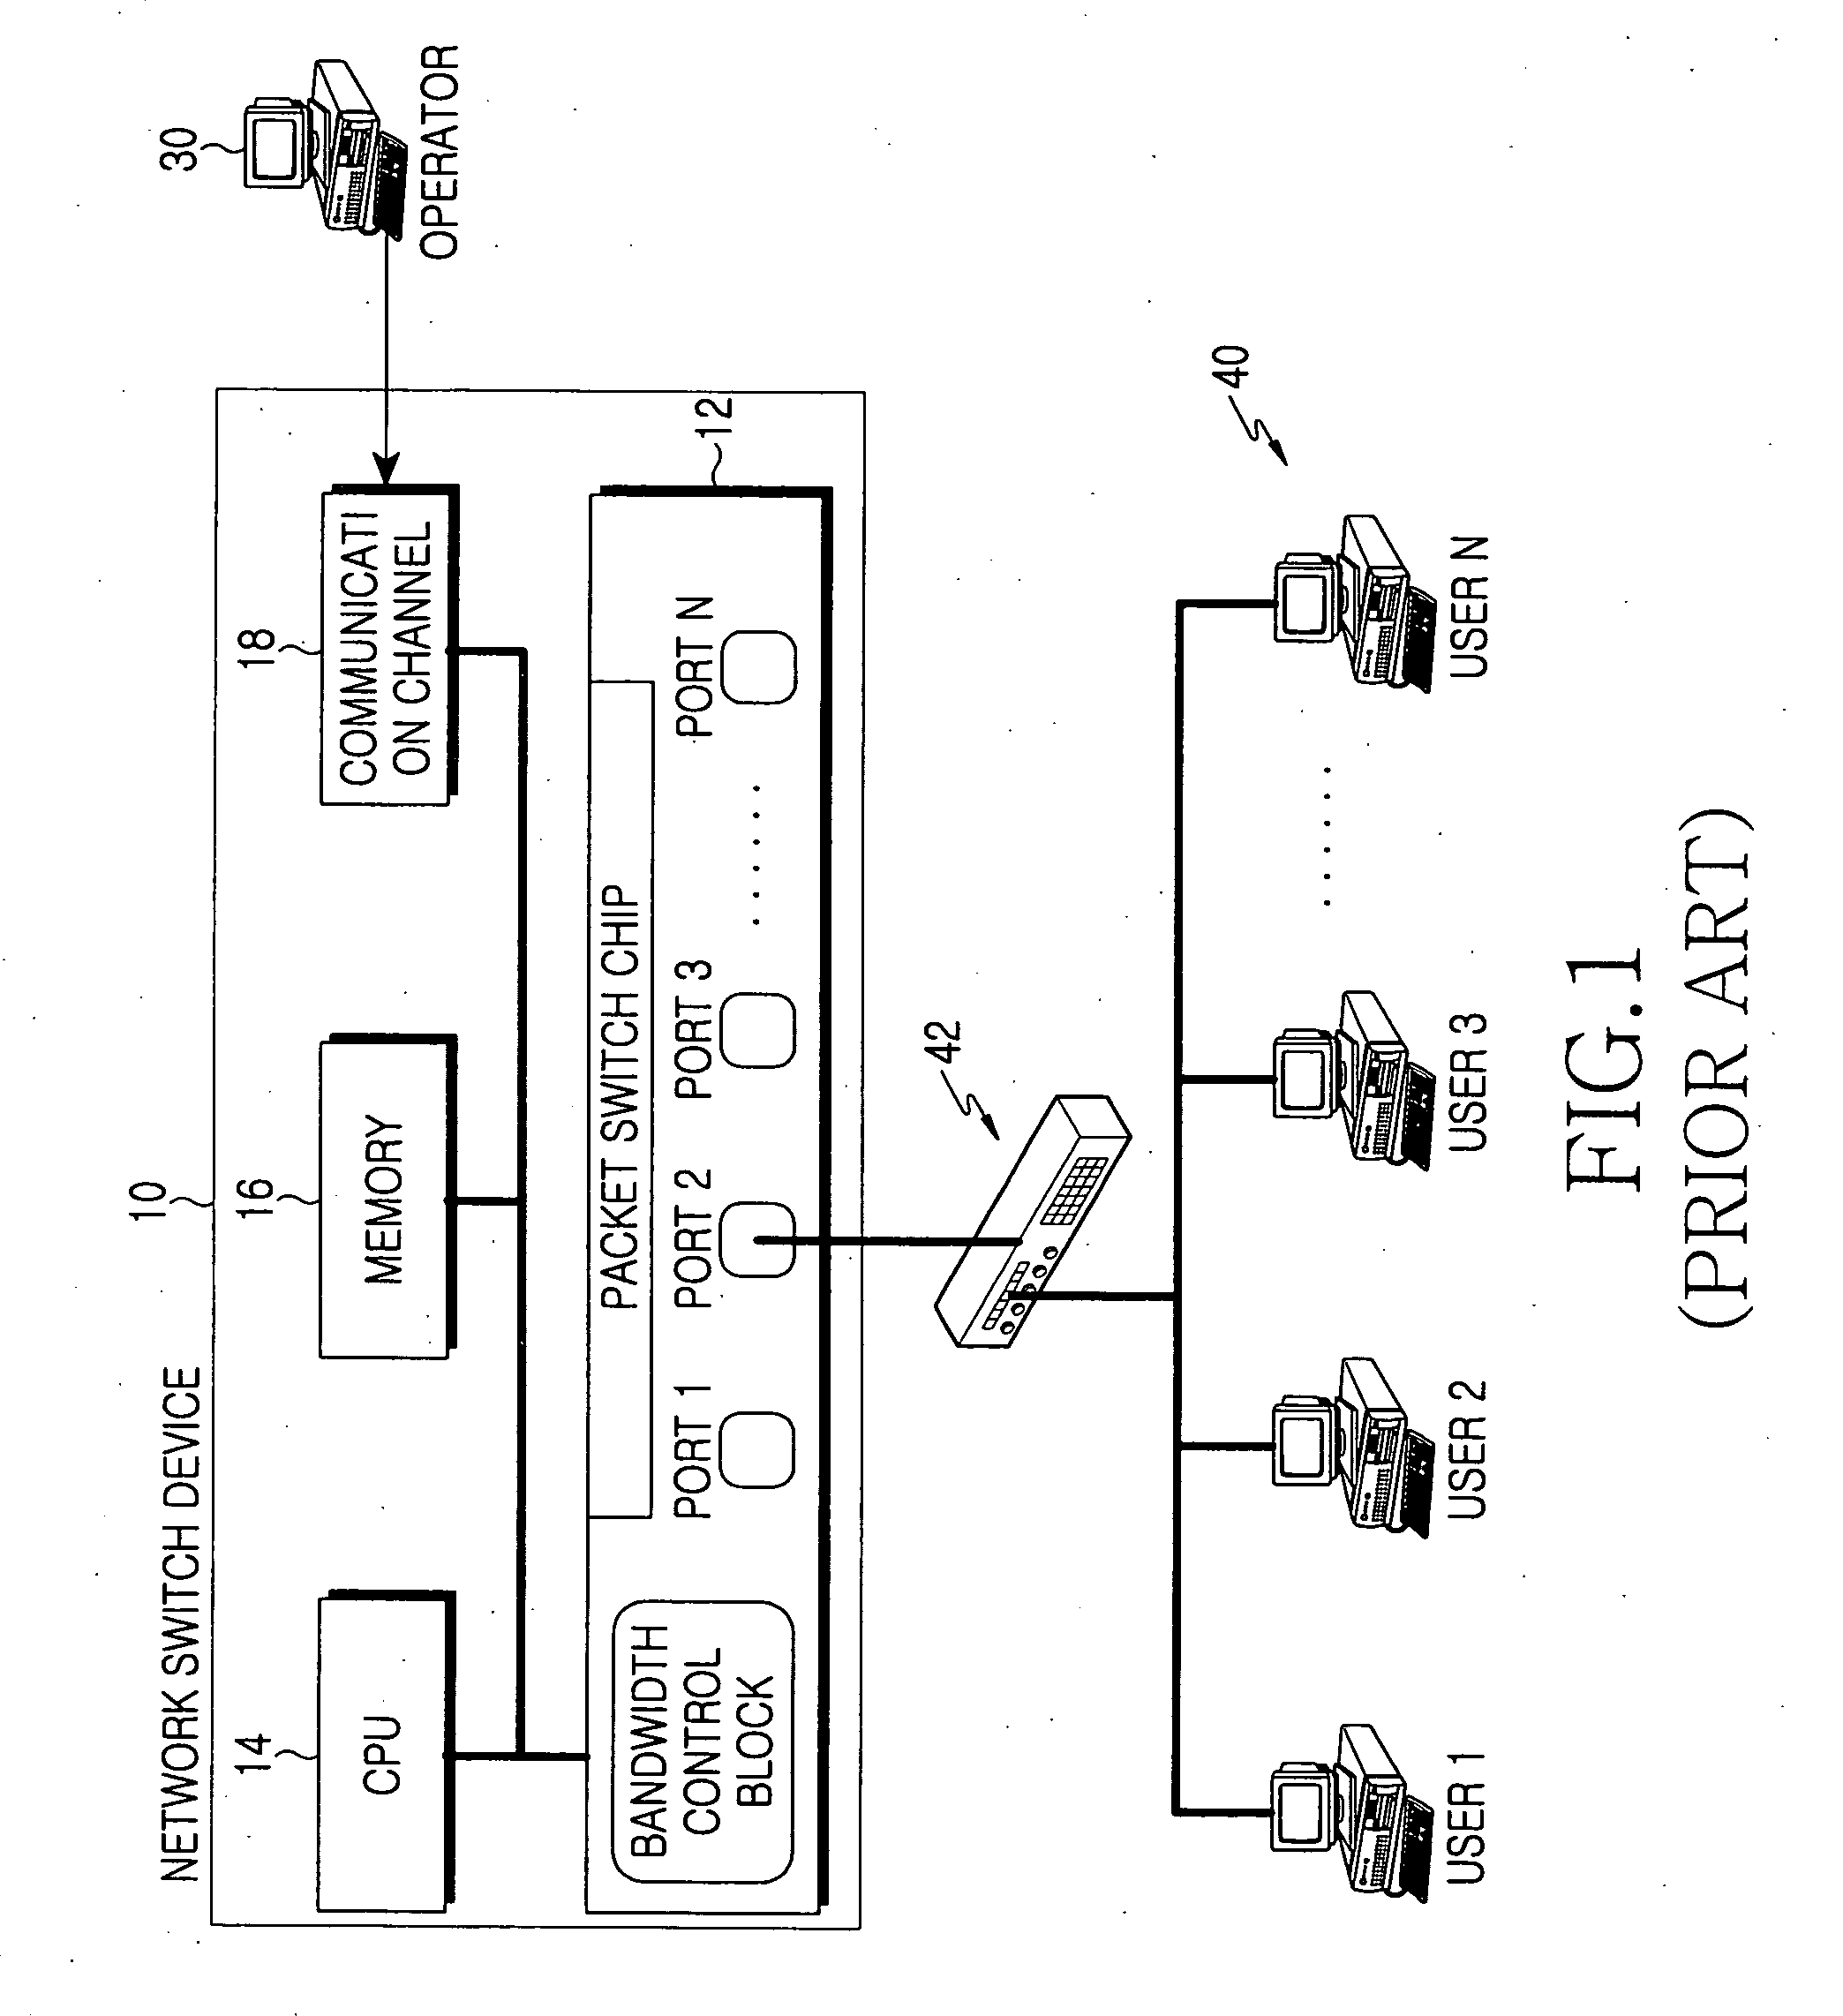 Packet switch equipment and bandwidth control method using the same